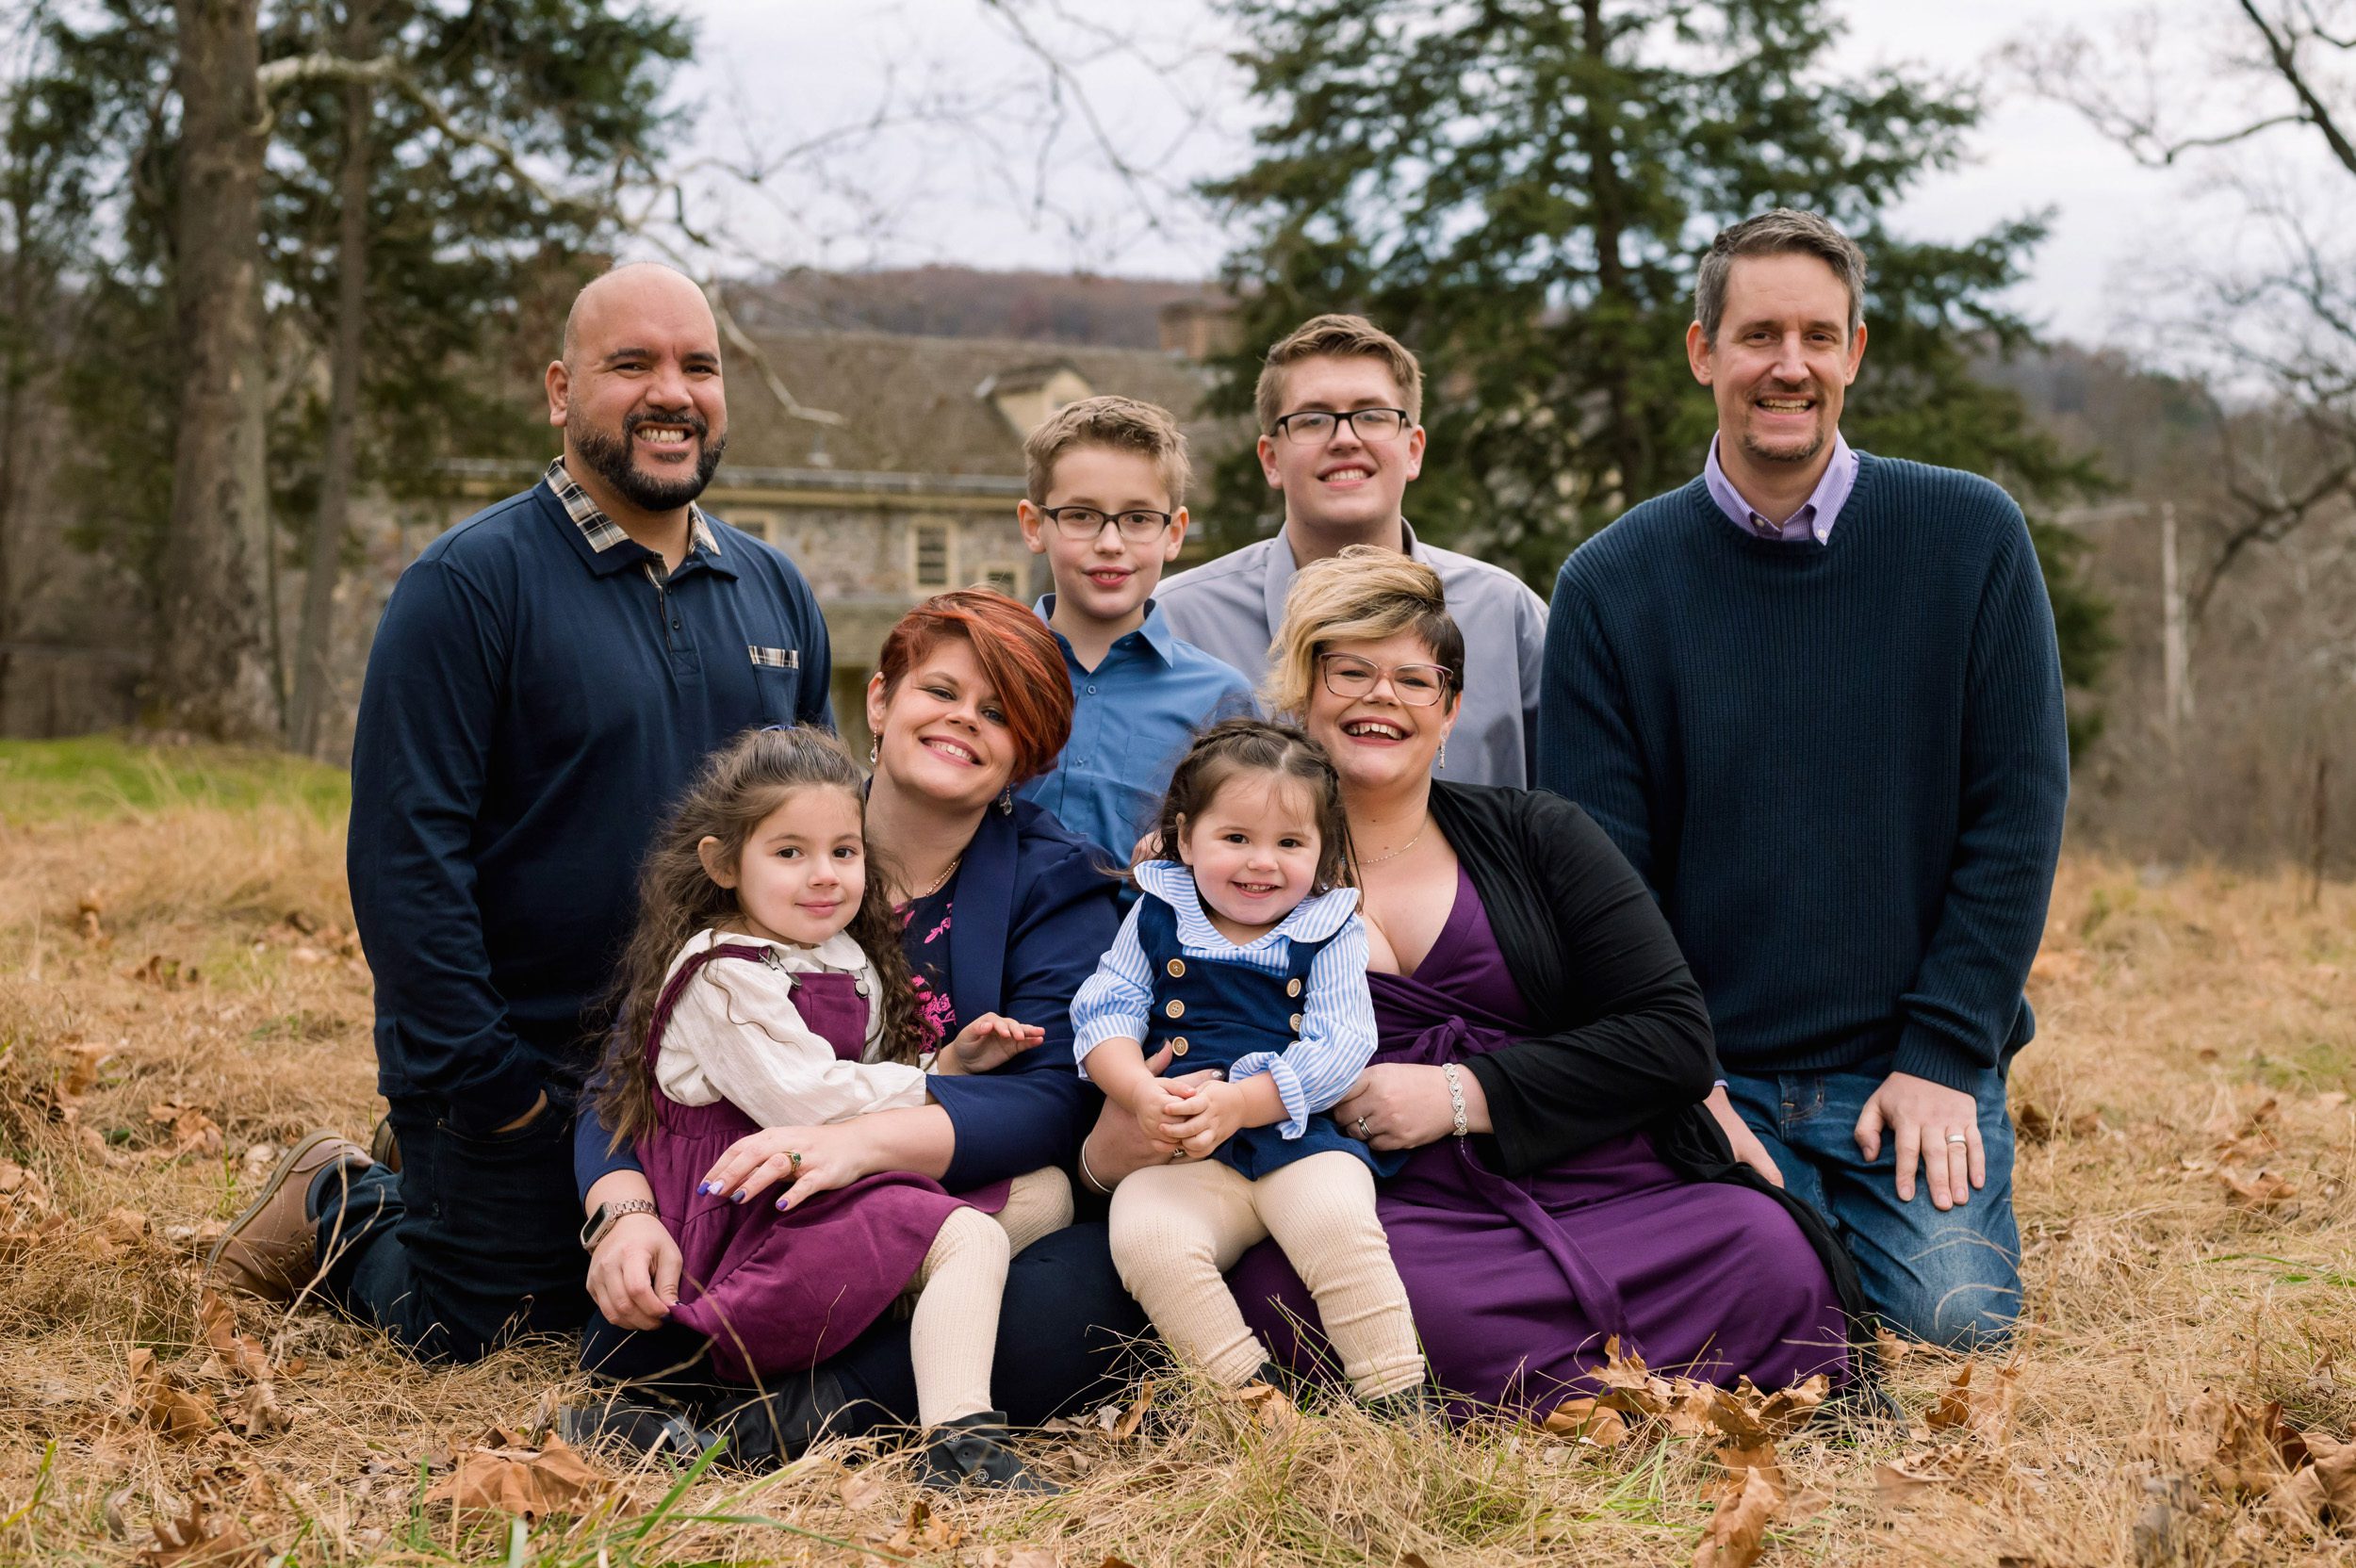 An extended family snuggling together in a grassy field during an extended family photoshoot